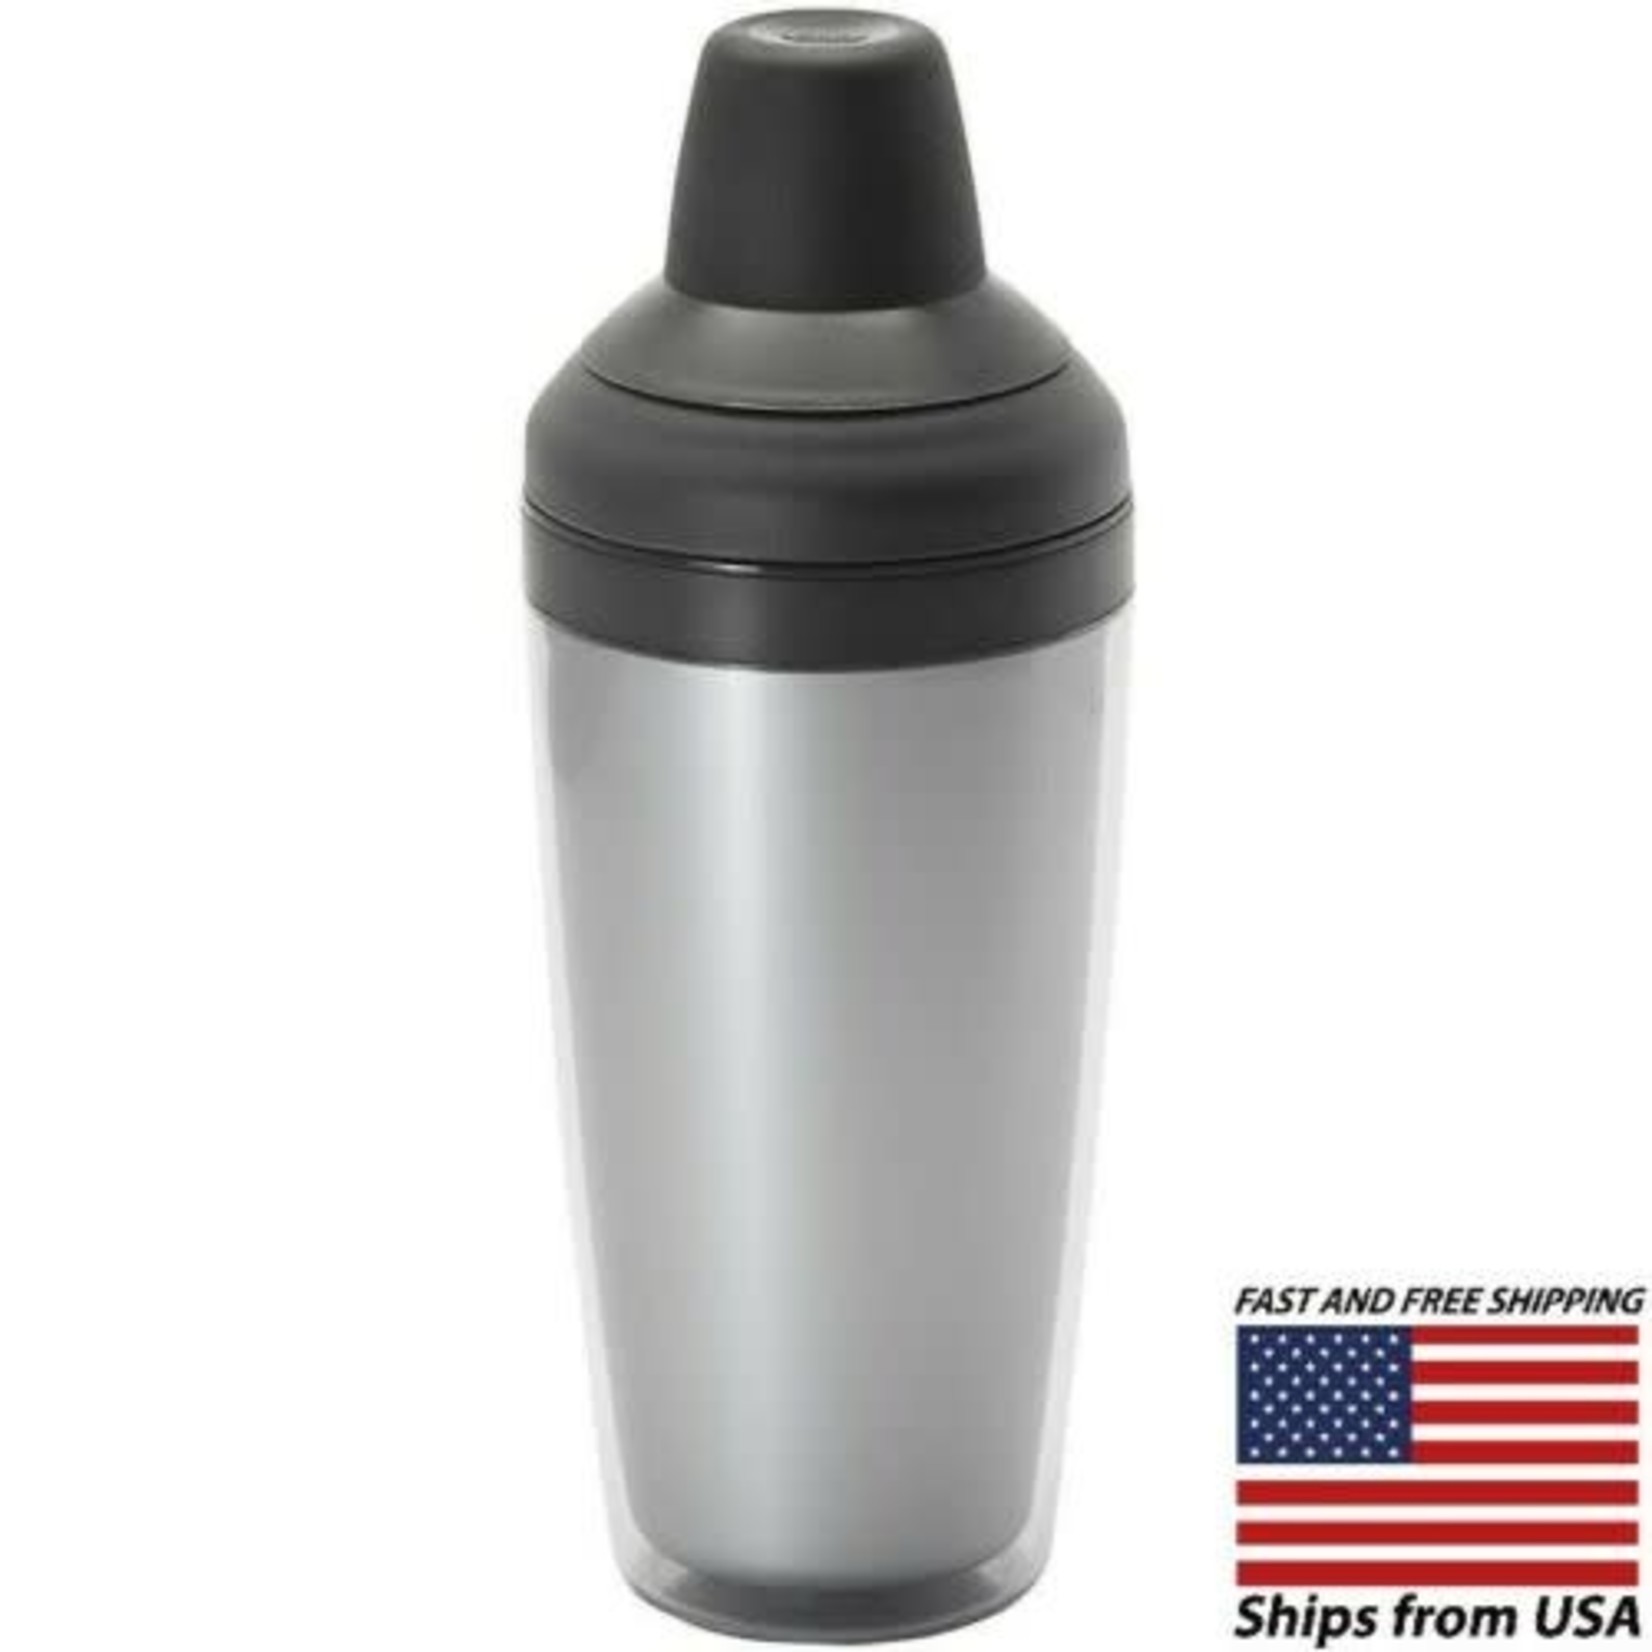 OXO OXO GG PLASTIC COCKTAIL SHAKER - The Westview Shop